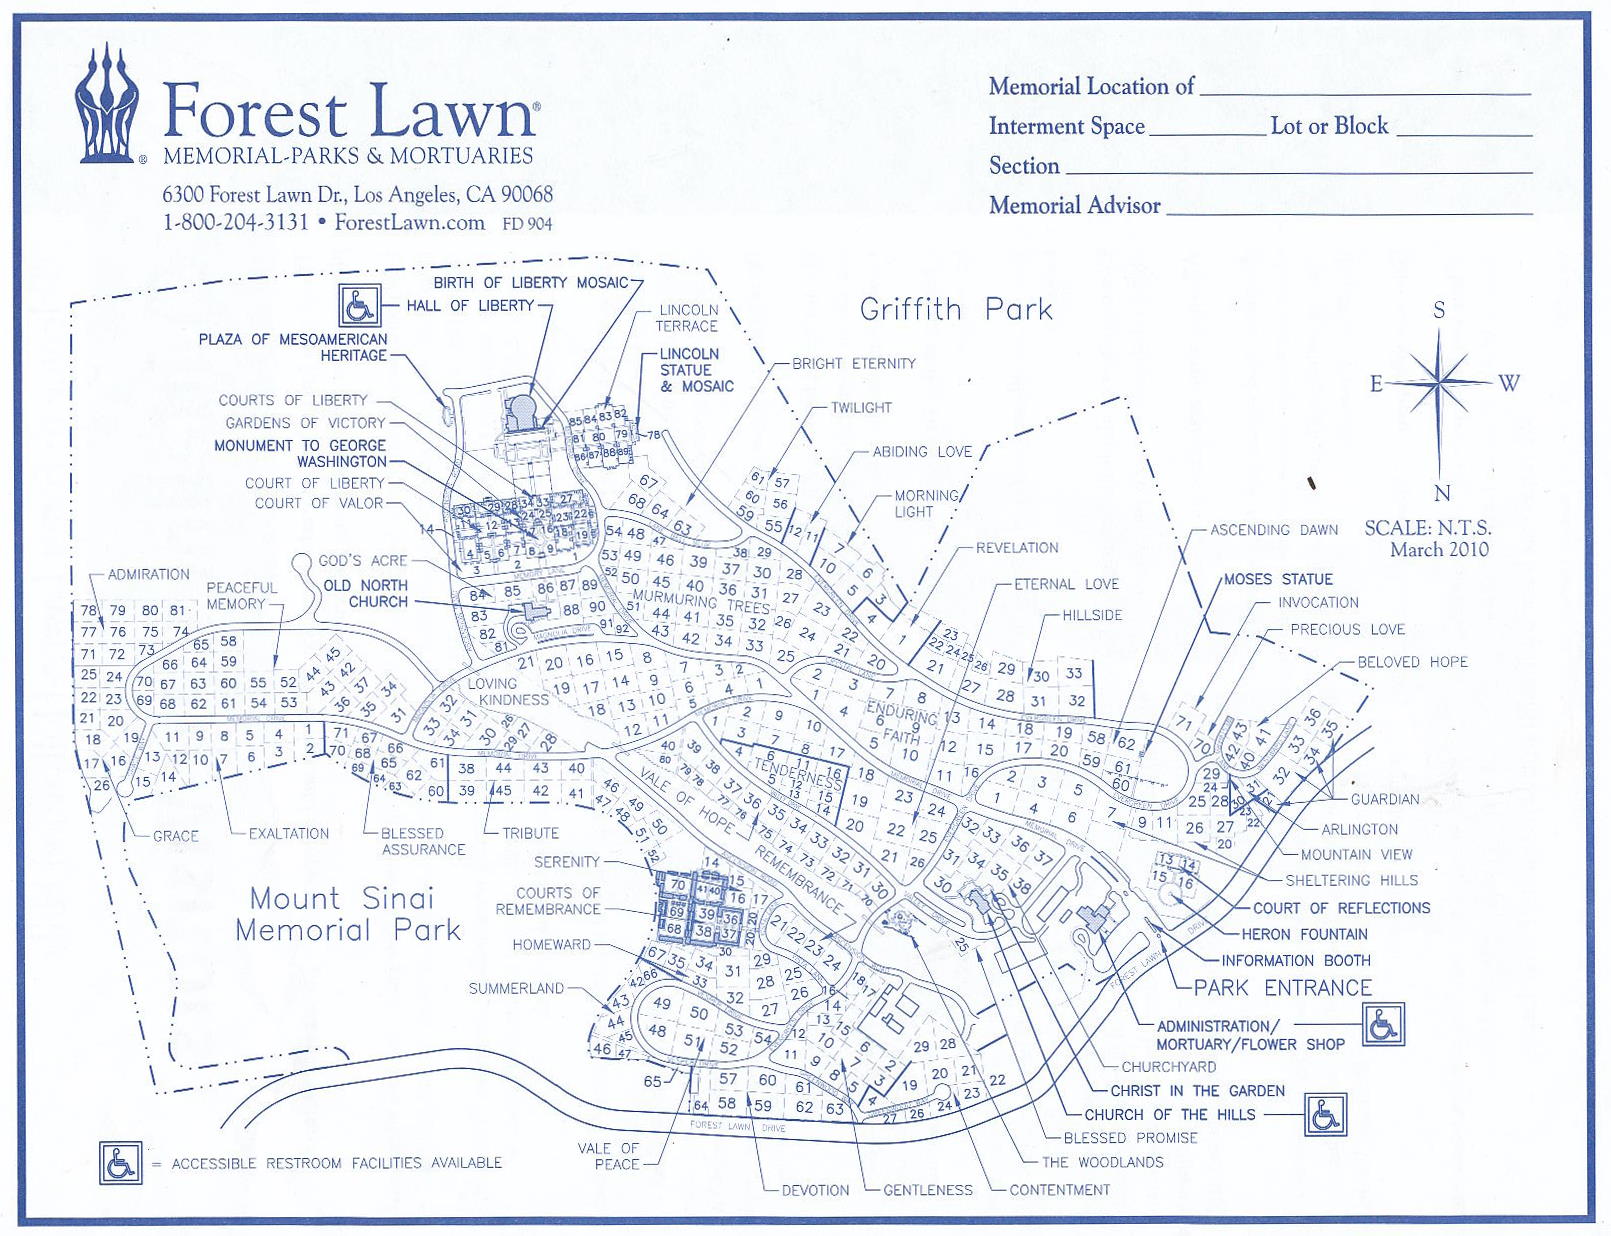 Map of Forest Lawn Memorial Cemetery in Hollywood Hills